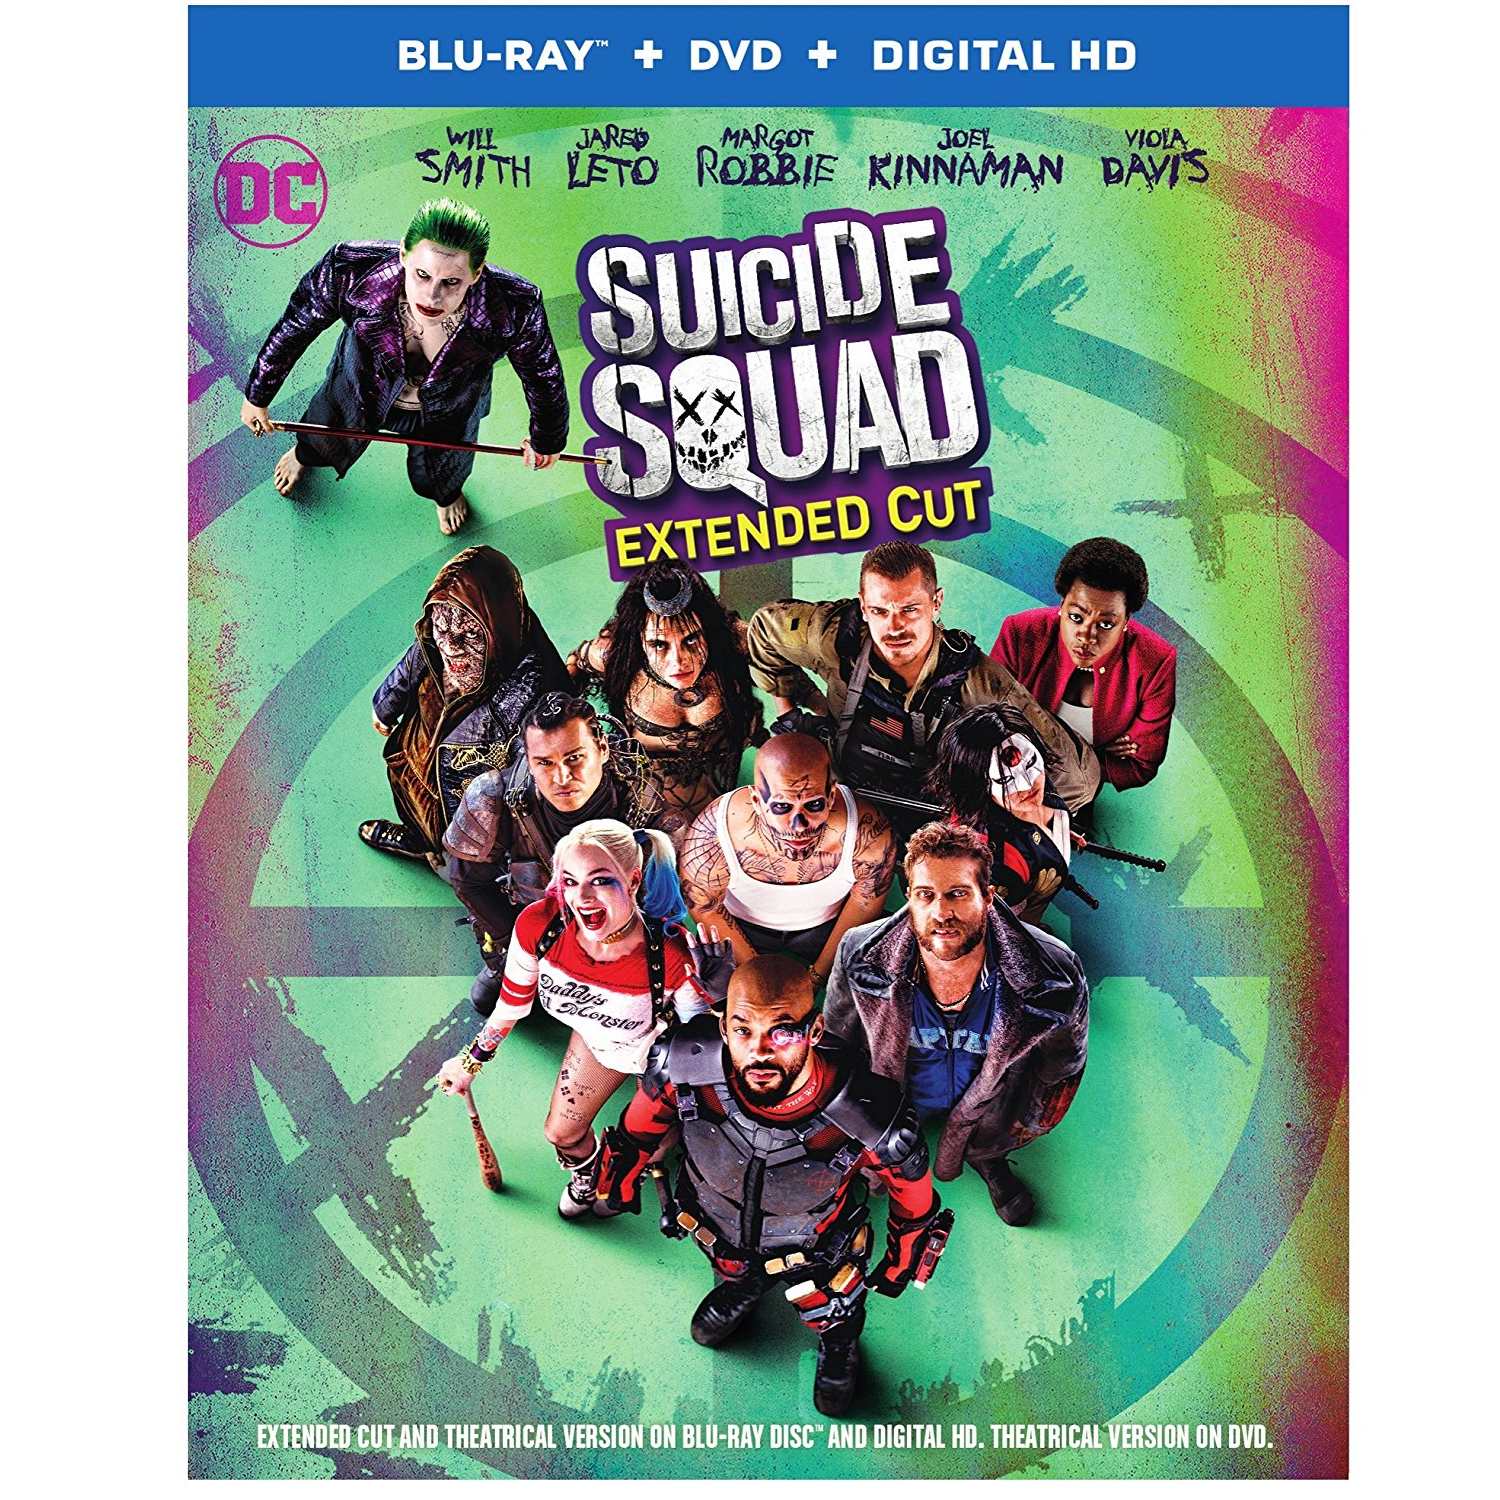 NEW RELEASE! Suicide Squad (Extended Cut Blu-ray + DVD + Digital HD UltraViolet Combo Pack) Only $24.99!